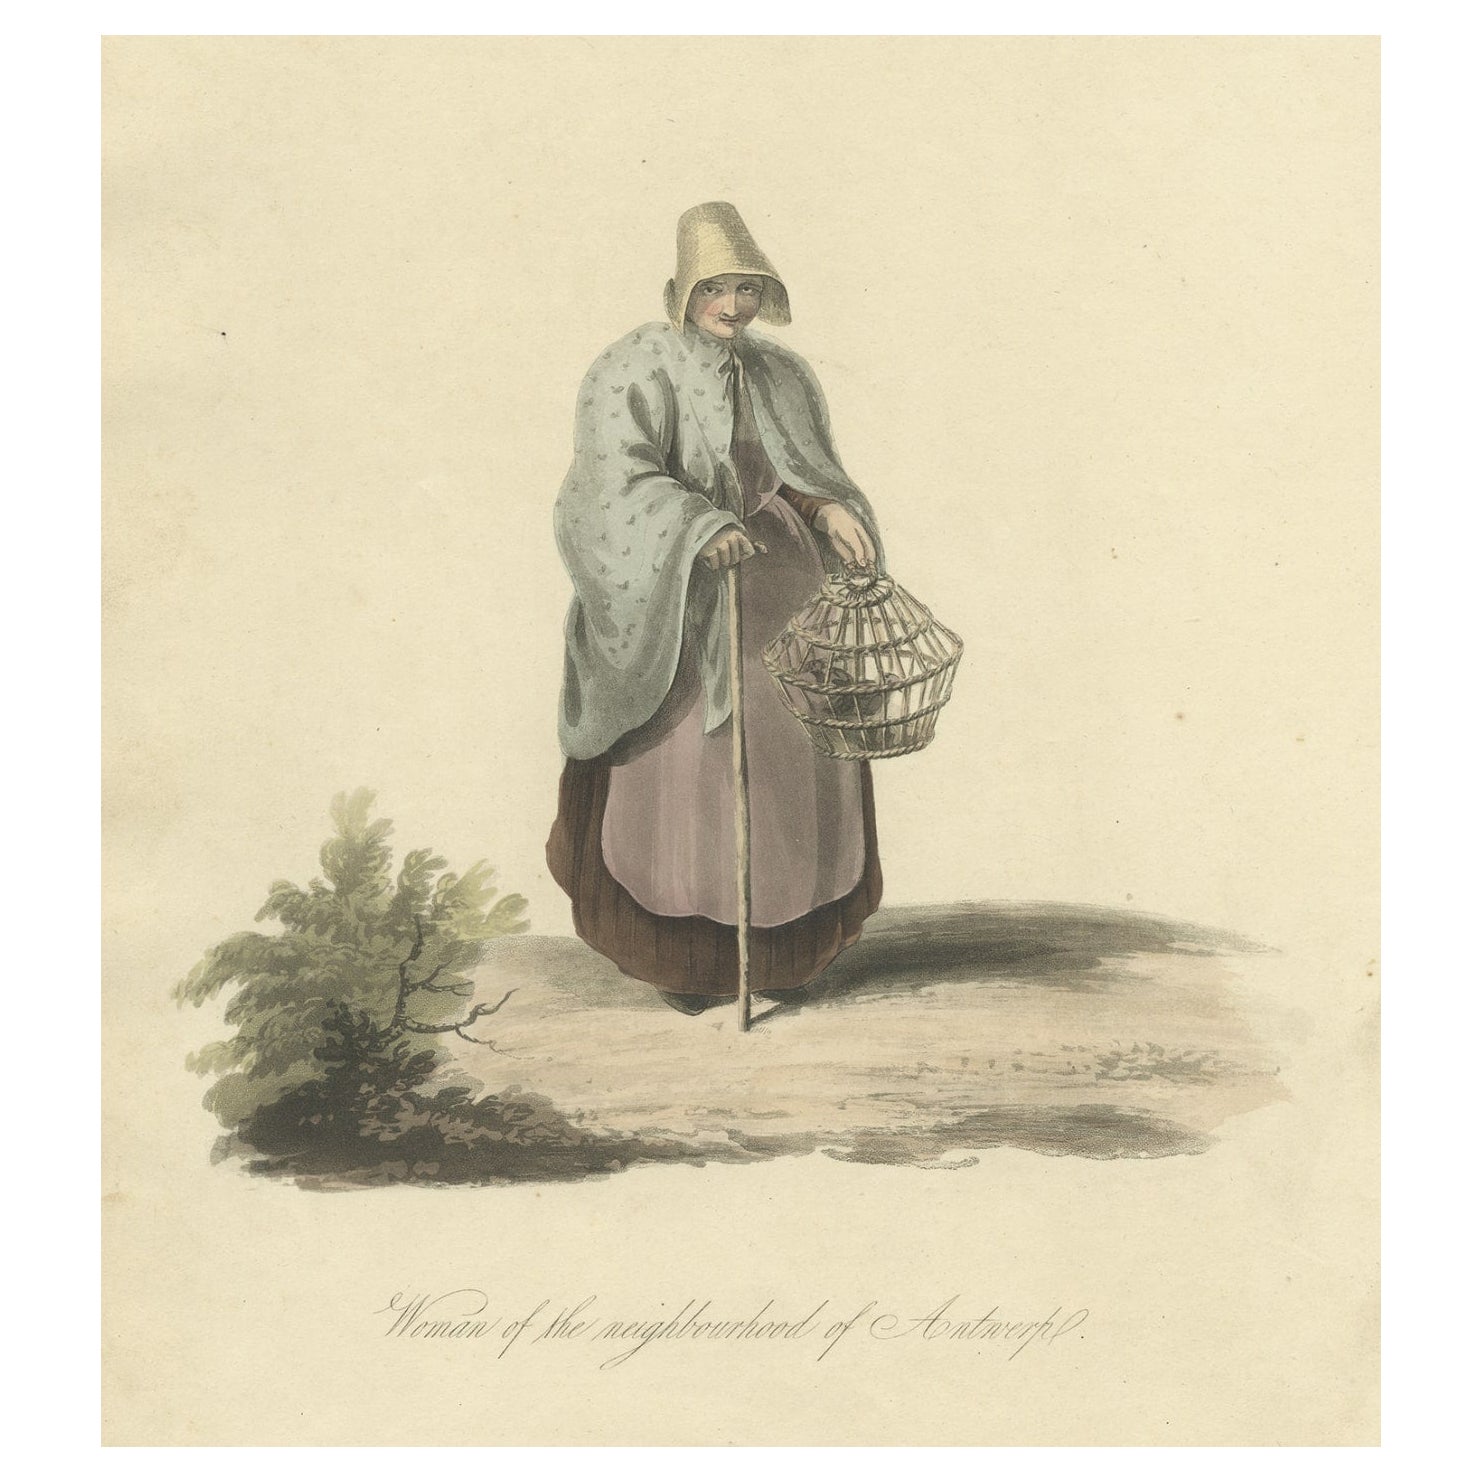 Antique Handcolored Engraving of a Woman of Antwerp, Belgium, 1817